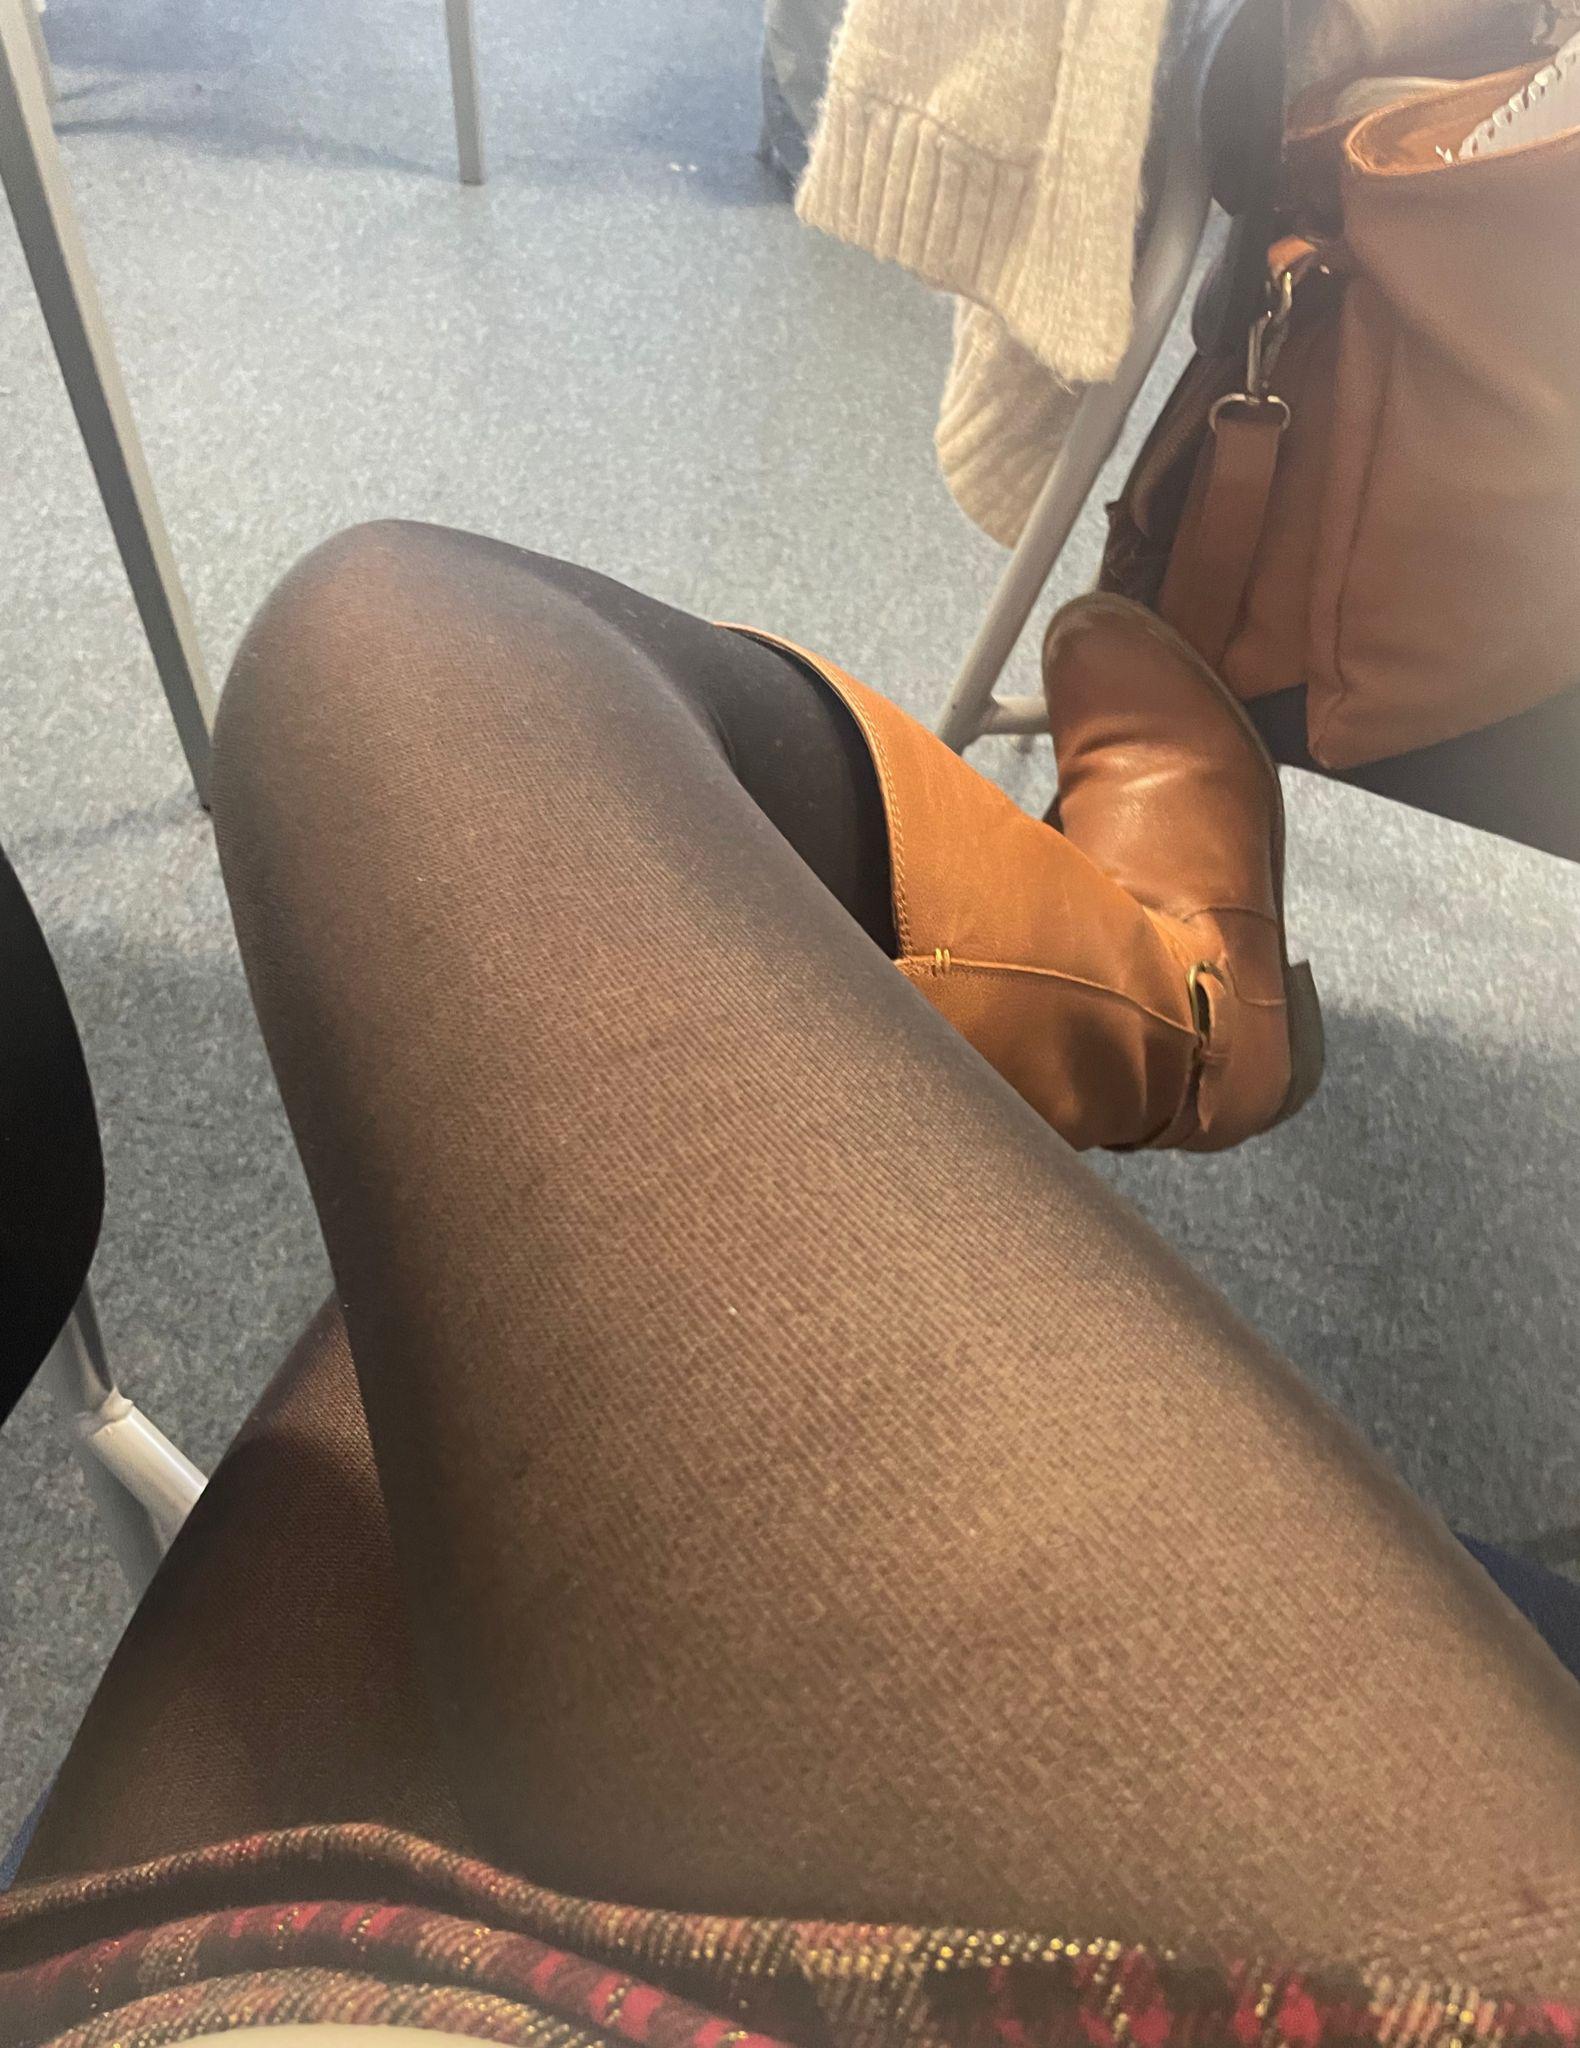 In class today, definitely got some looks when crossing my legs in this little skirt 🤭